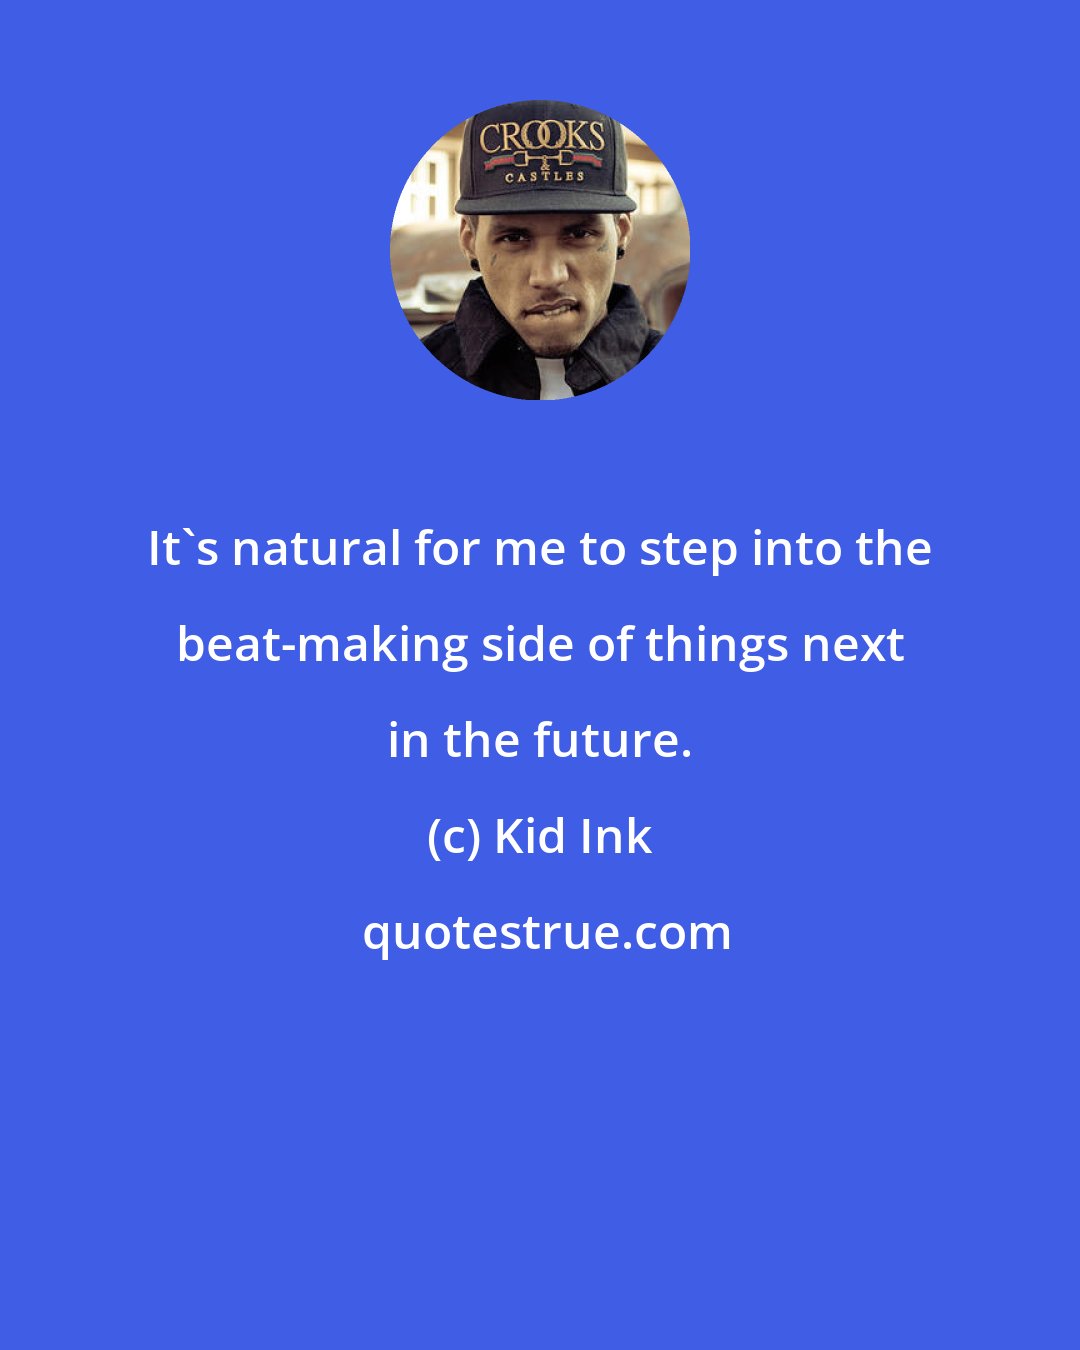 Kid Ink: It's natural for me to step into the beat-making side of things next in the future.